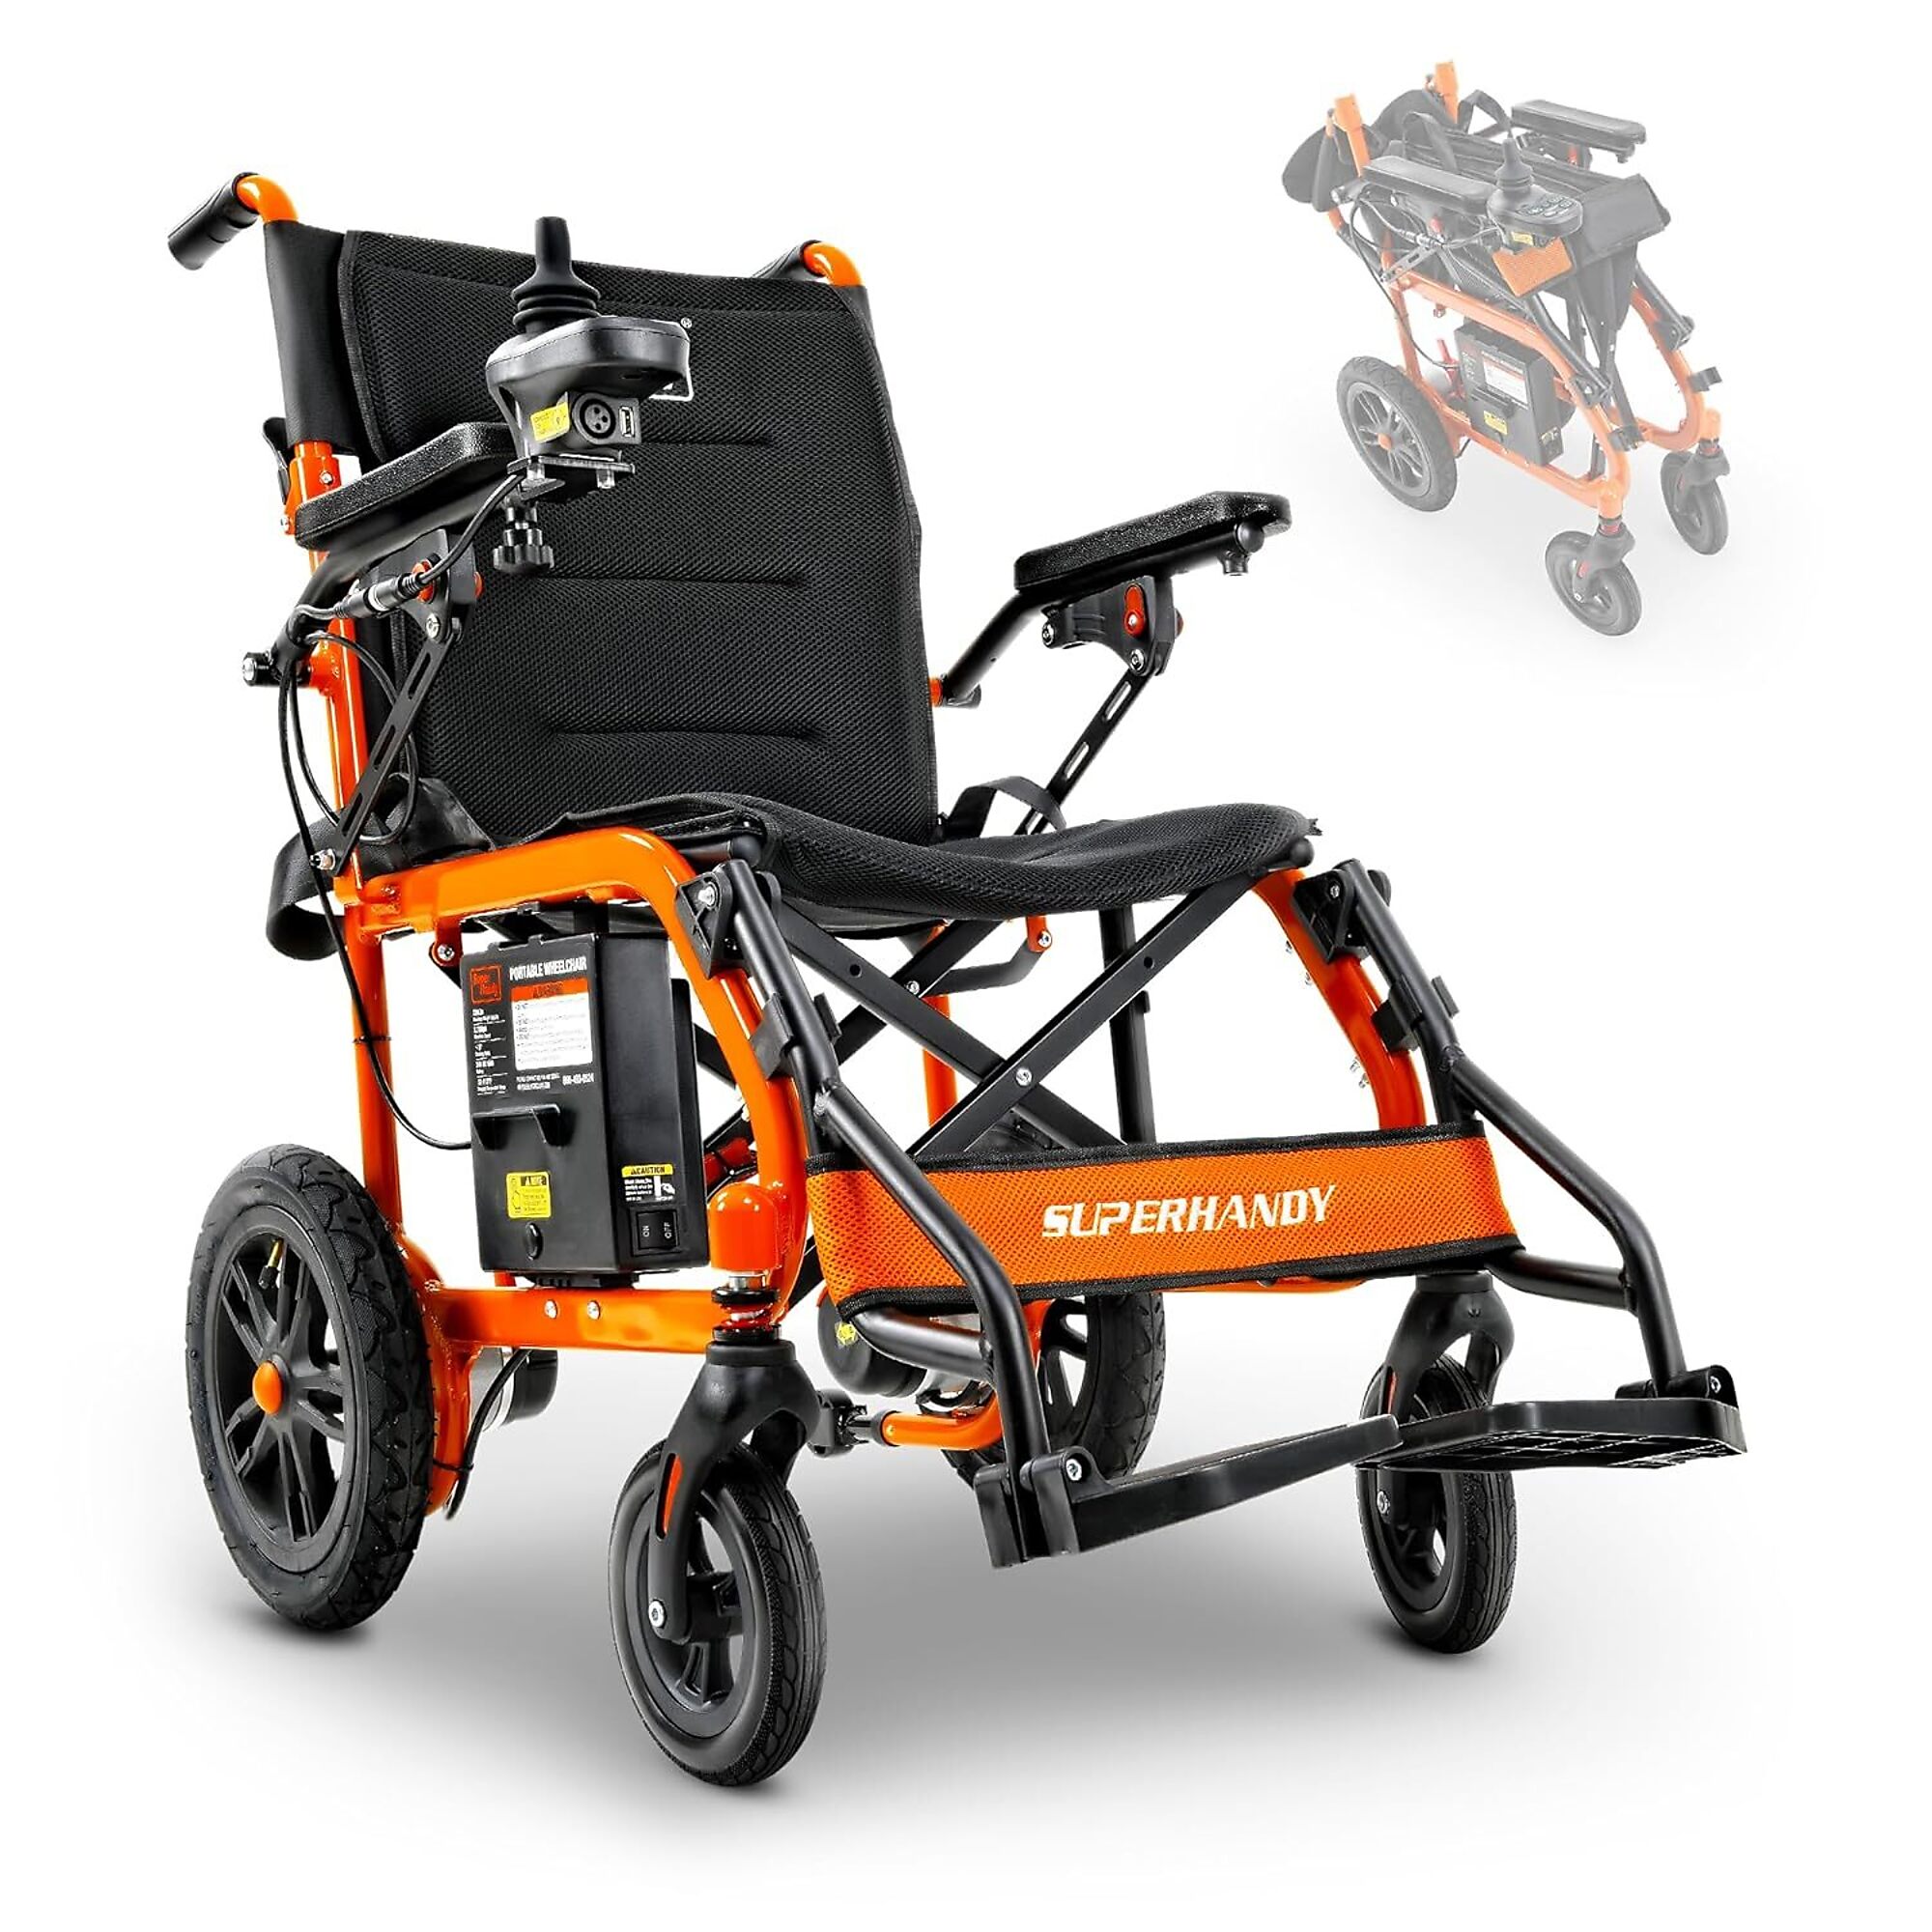 SuperHandy, Electric Wheelchair Lightweight Foldable, Max. Speed 3 MPH, Weight Capacity 220 lb, Model TRI-GUT155